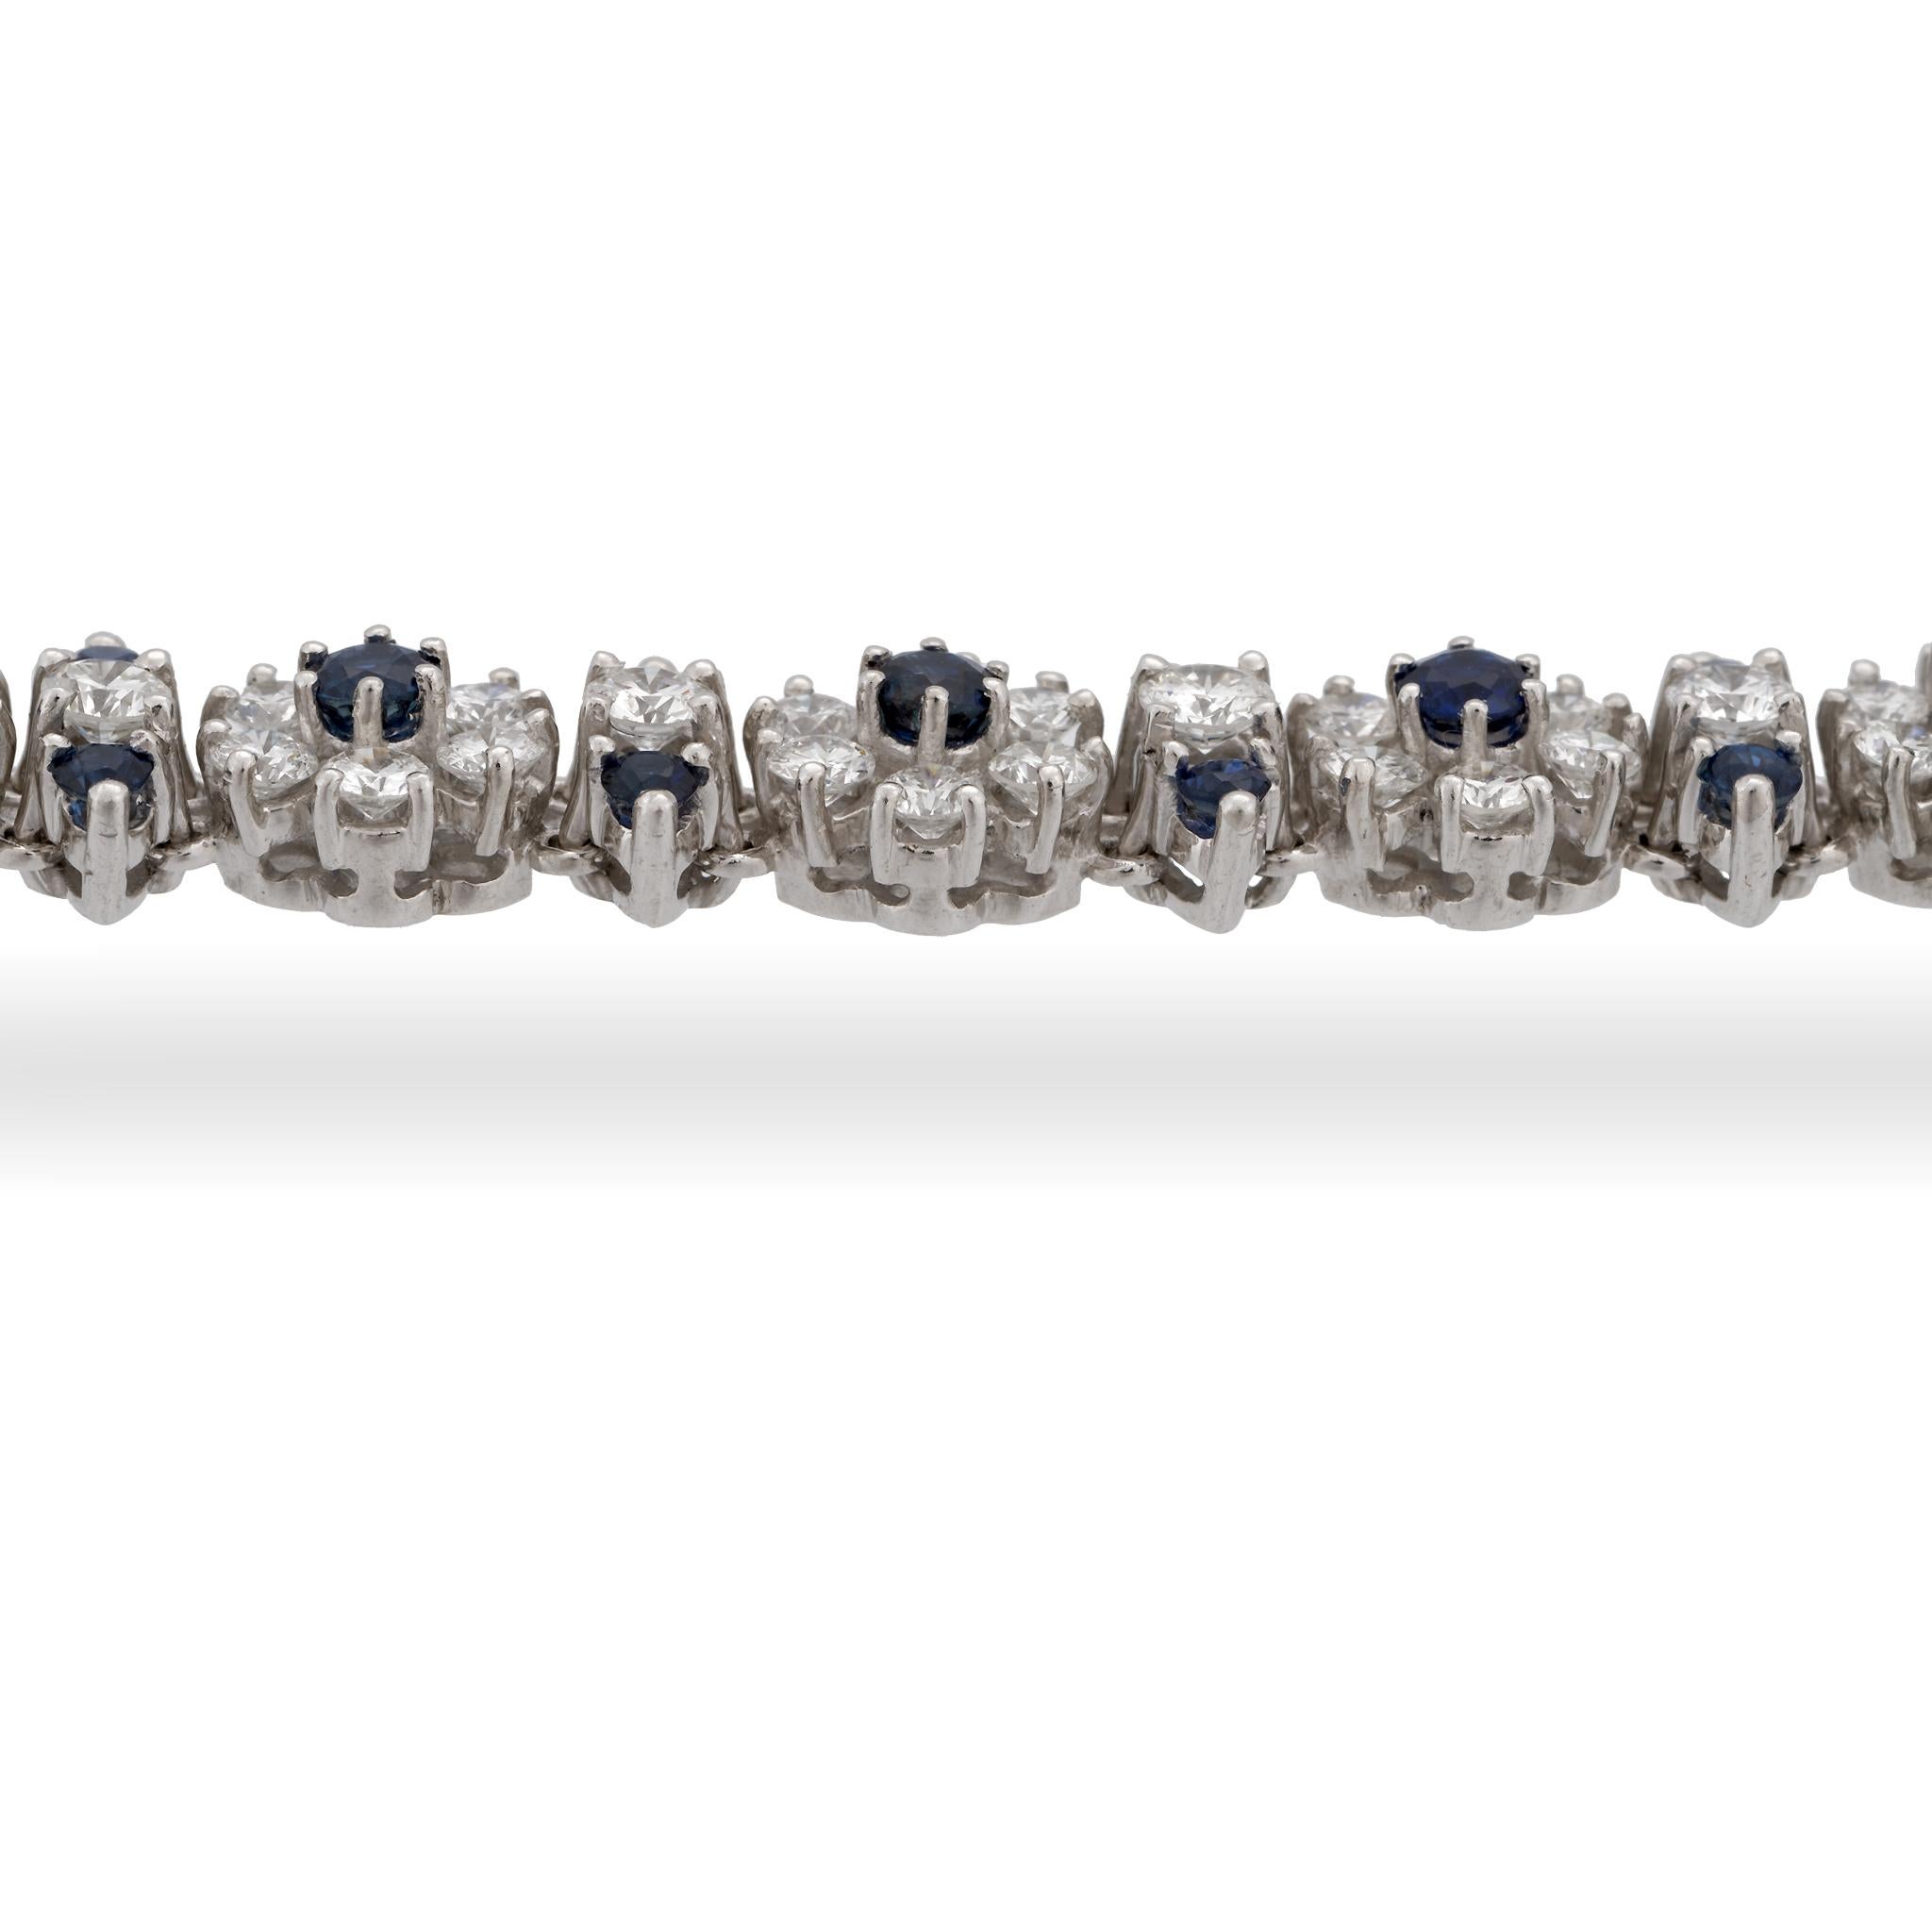 METAL TYPE: 18K Yellow Gold
STONE WEIGHT: Sapphire 2.0ct twd and Diamond 9.0ct twd
TOTAL WEIGHT: 42.4g
BRACELET LENGTH: 6.25